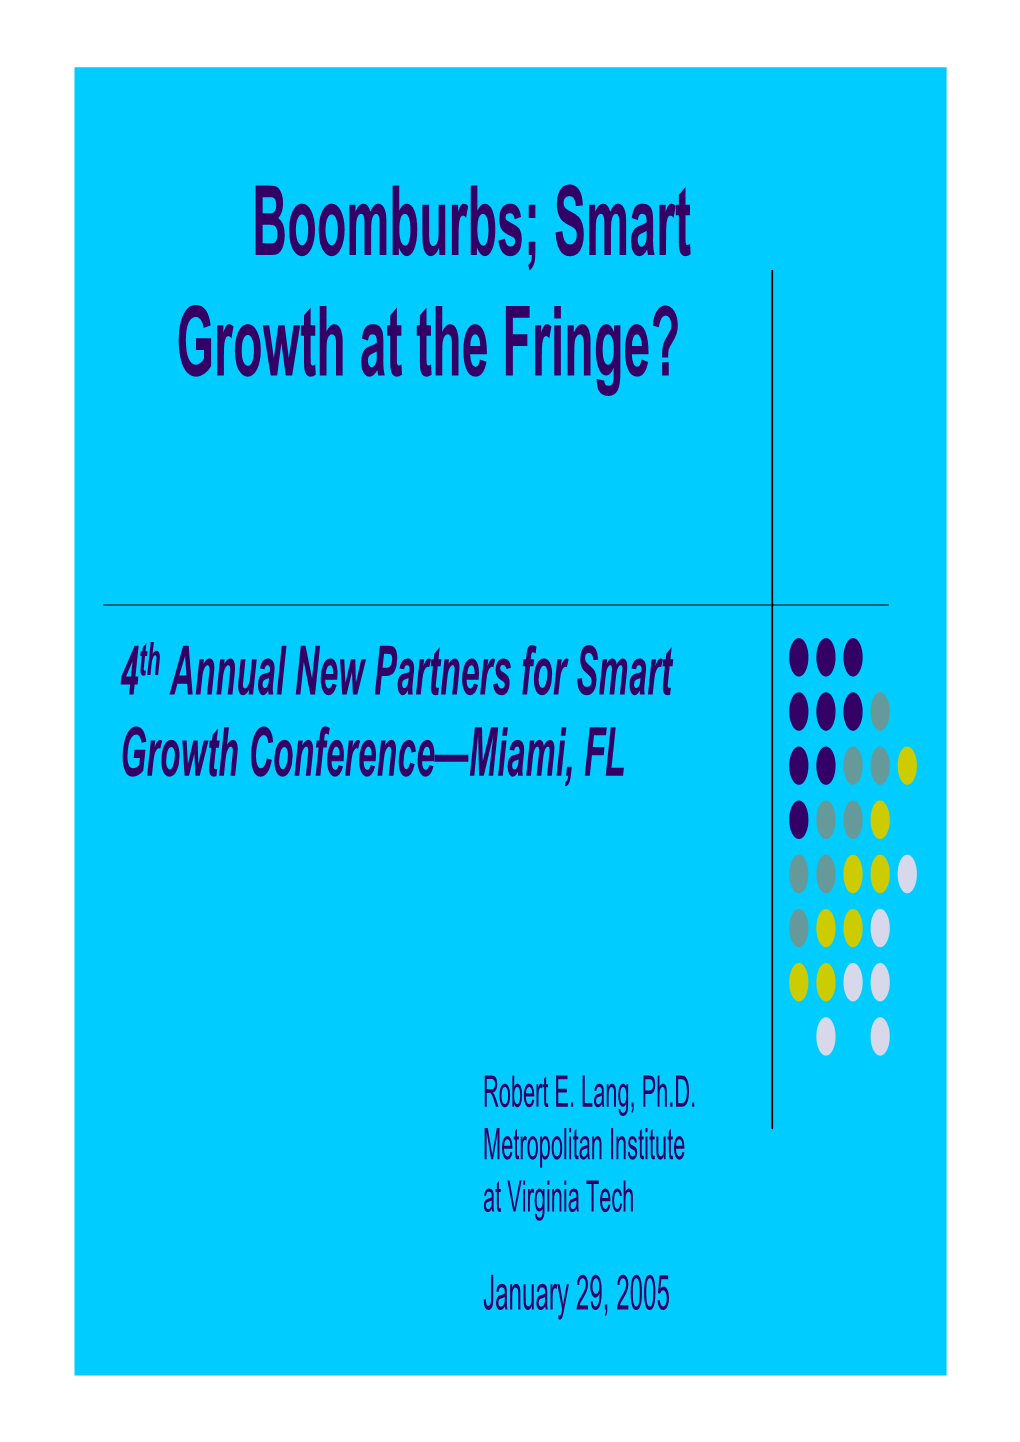 Boomburbs; Smart Growth at the Fringe?